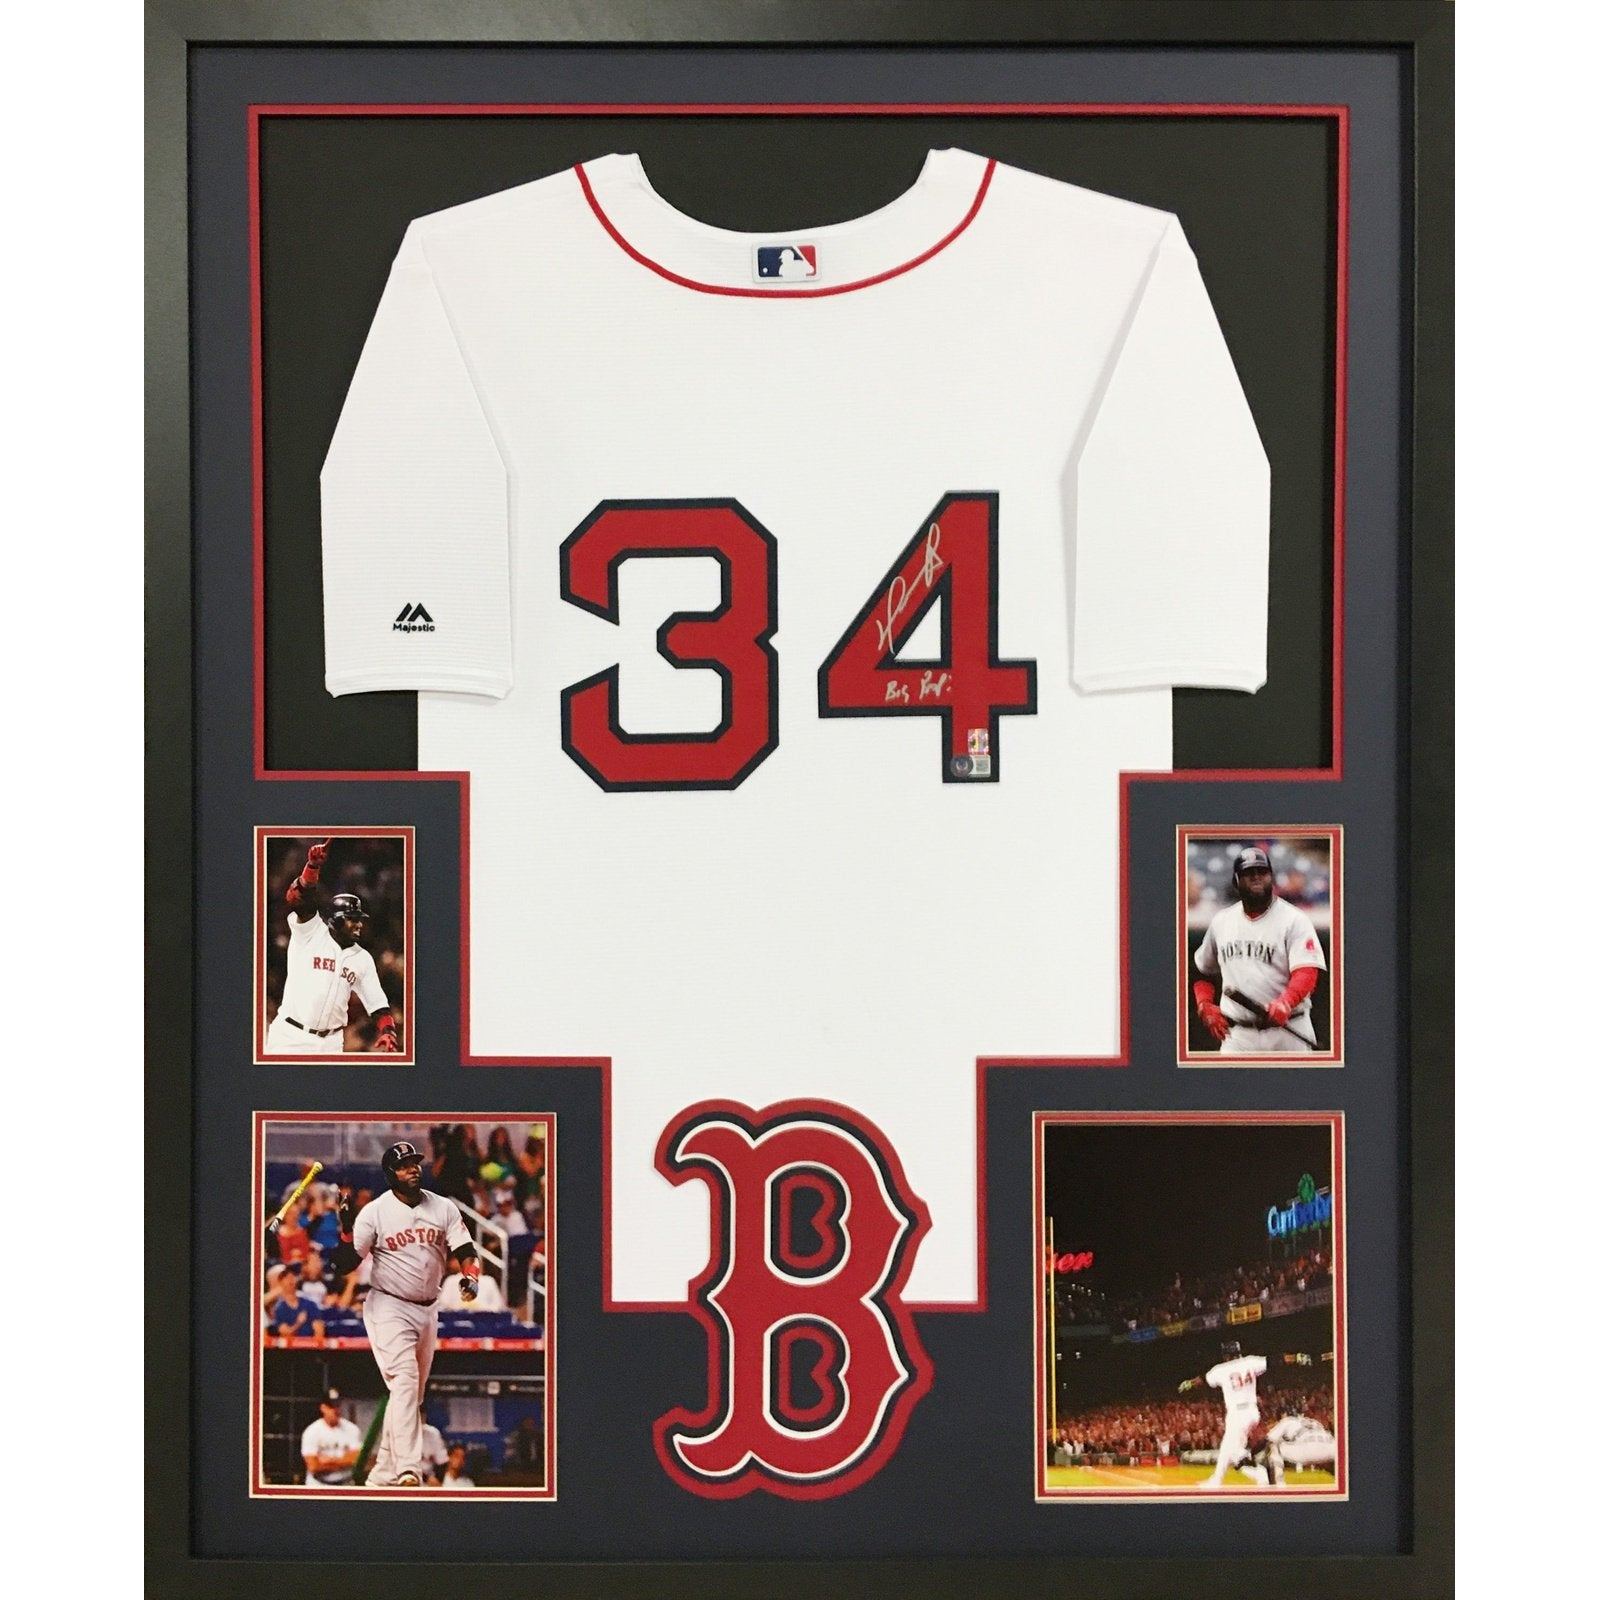 David Ortiz Autographed and Framed Boston Red Sox Jersey